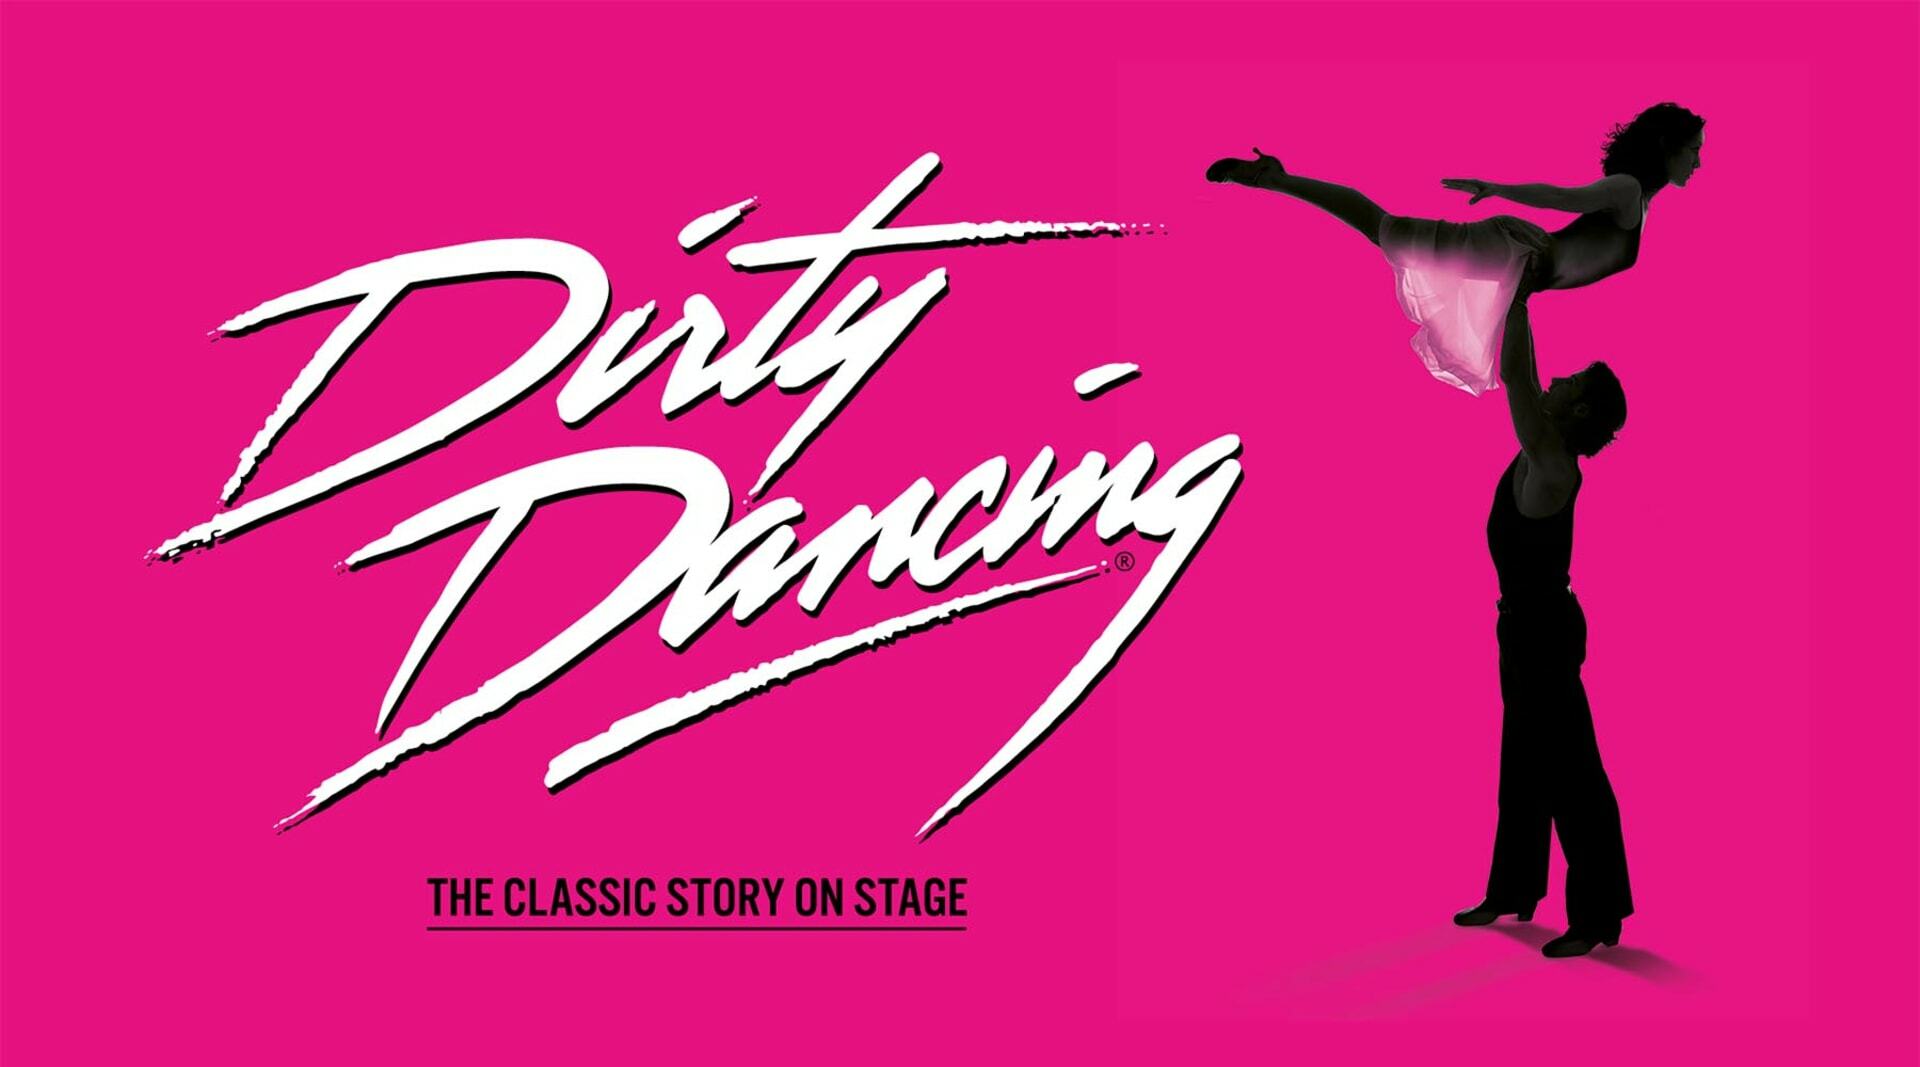 Dirty Dancing returns to the West End in 2022!